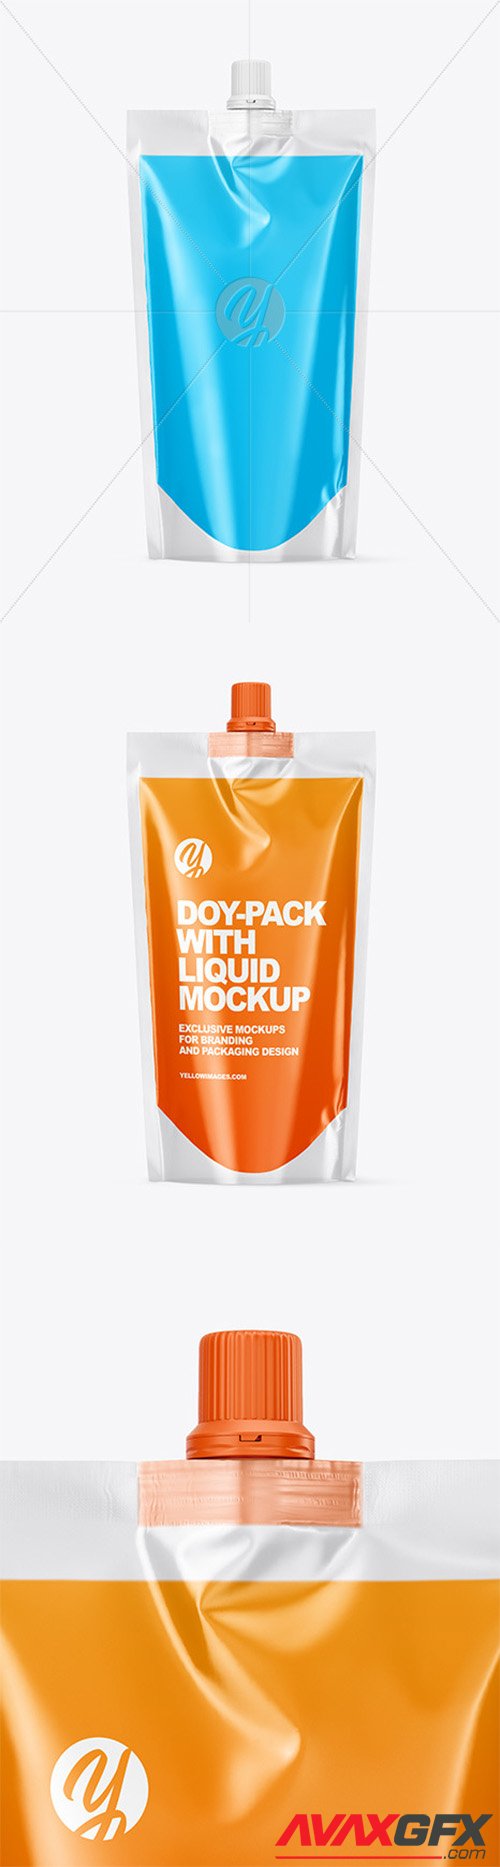 Doy-Pack with Liquid Mockup 61330